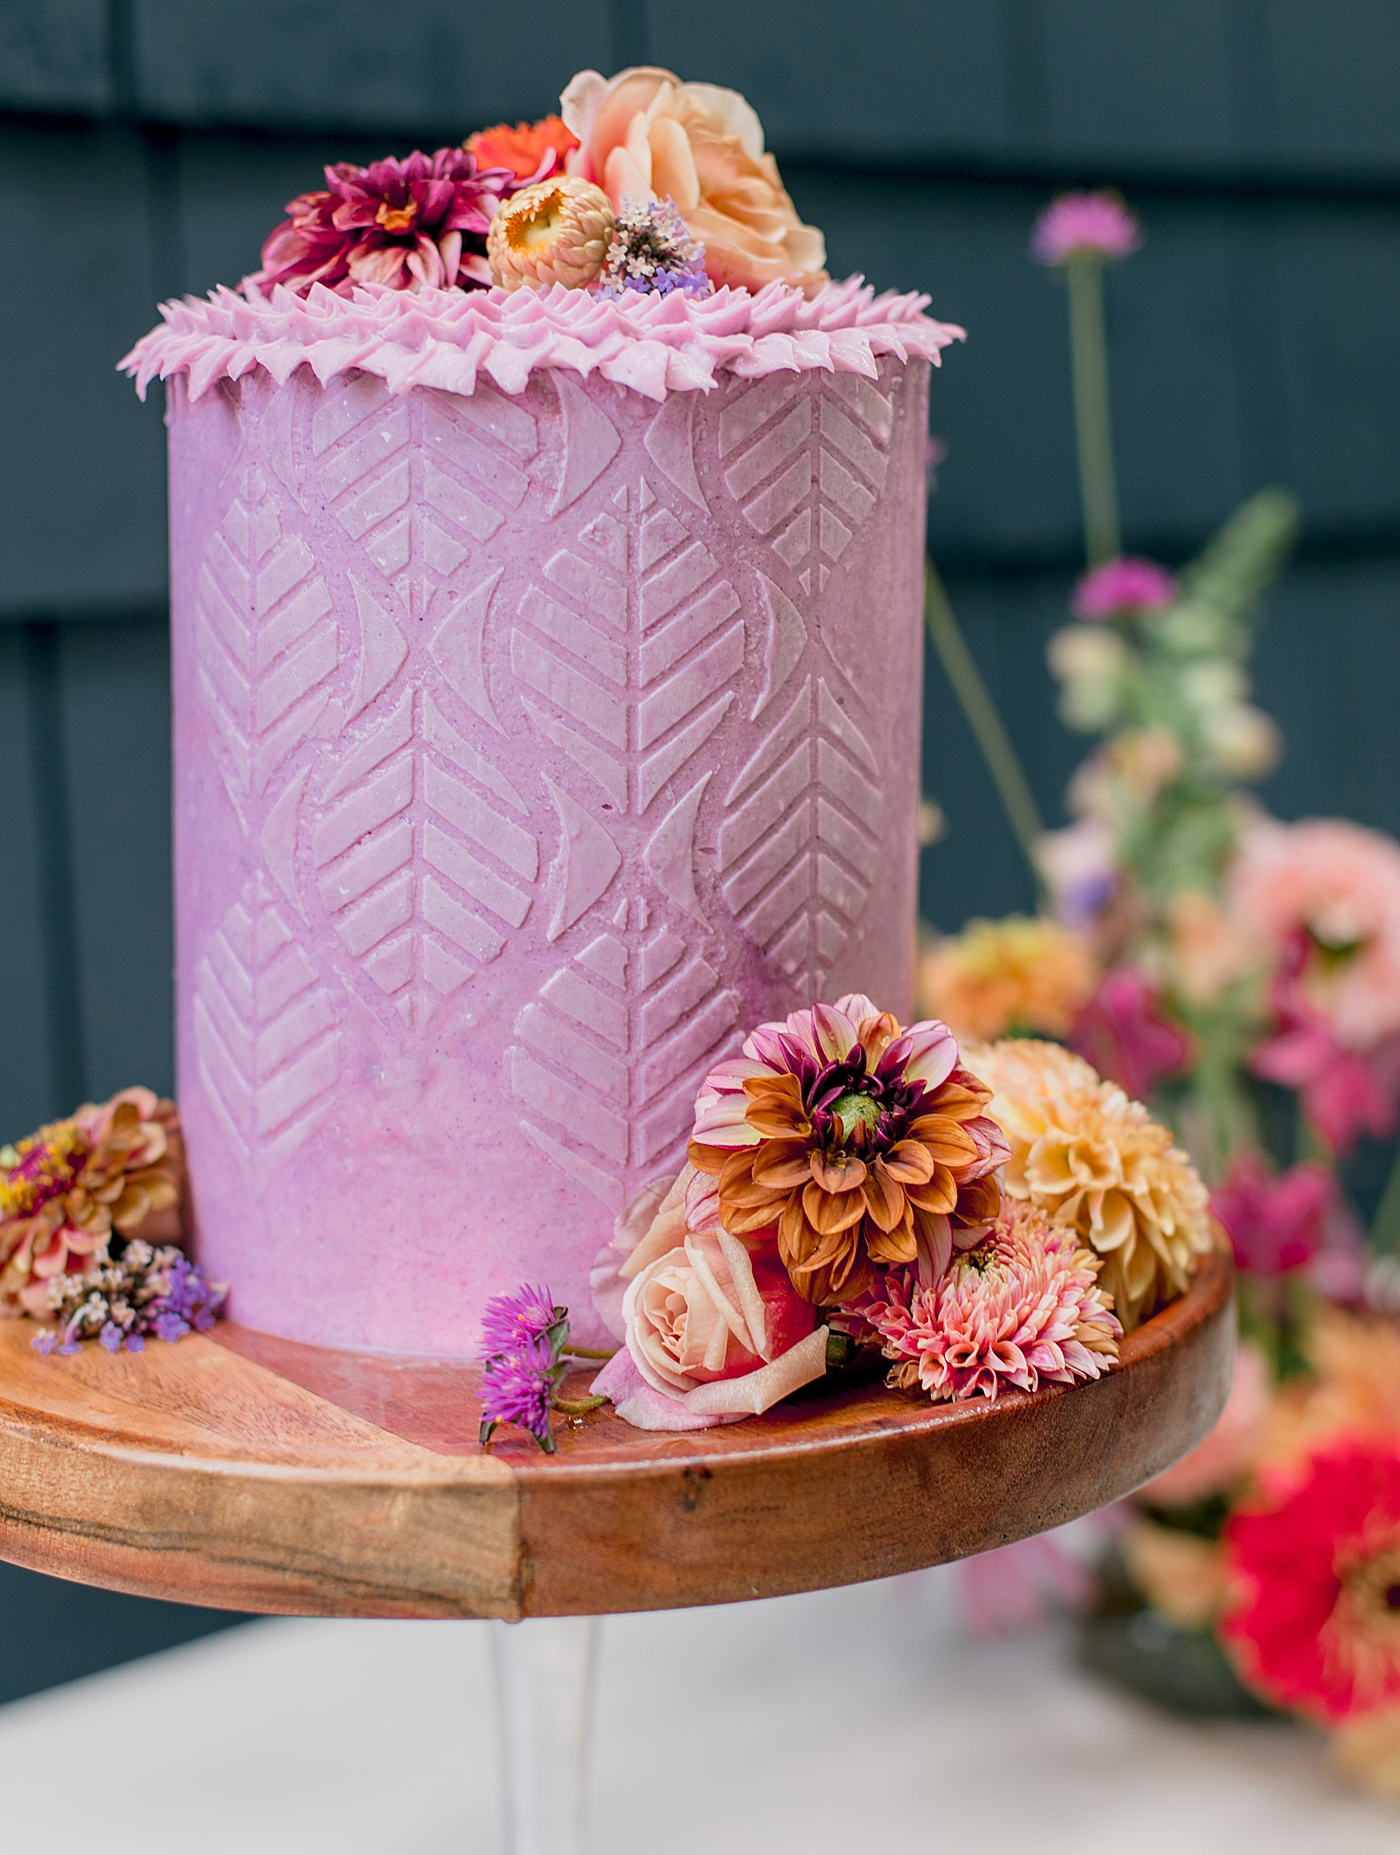 Purple wedding cake with stencil details decorated by colorful flowers | Image by Hope Helmuth Photography